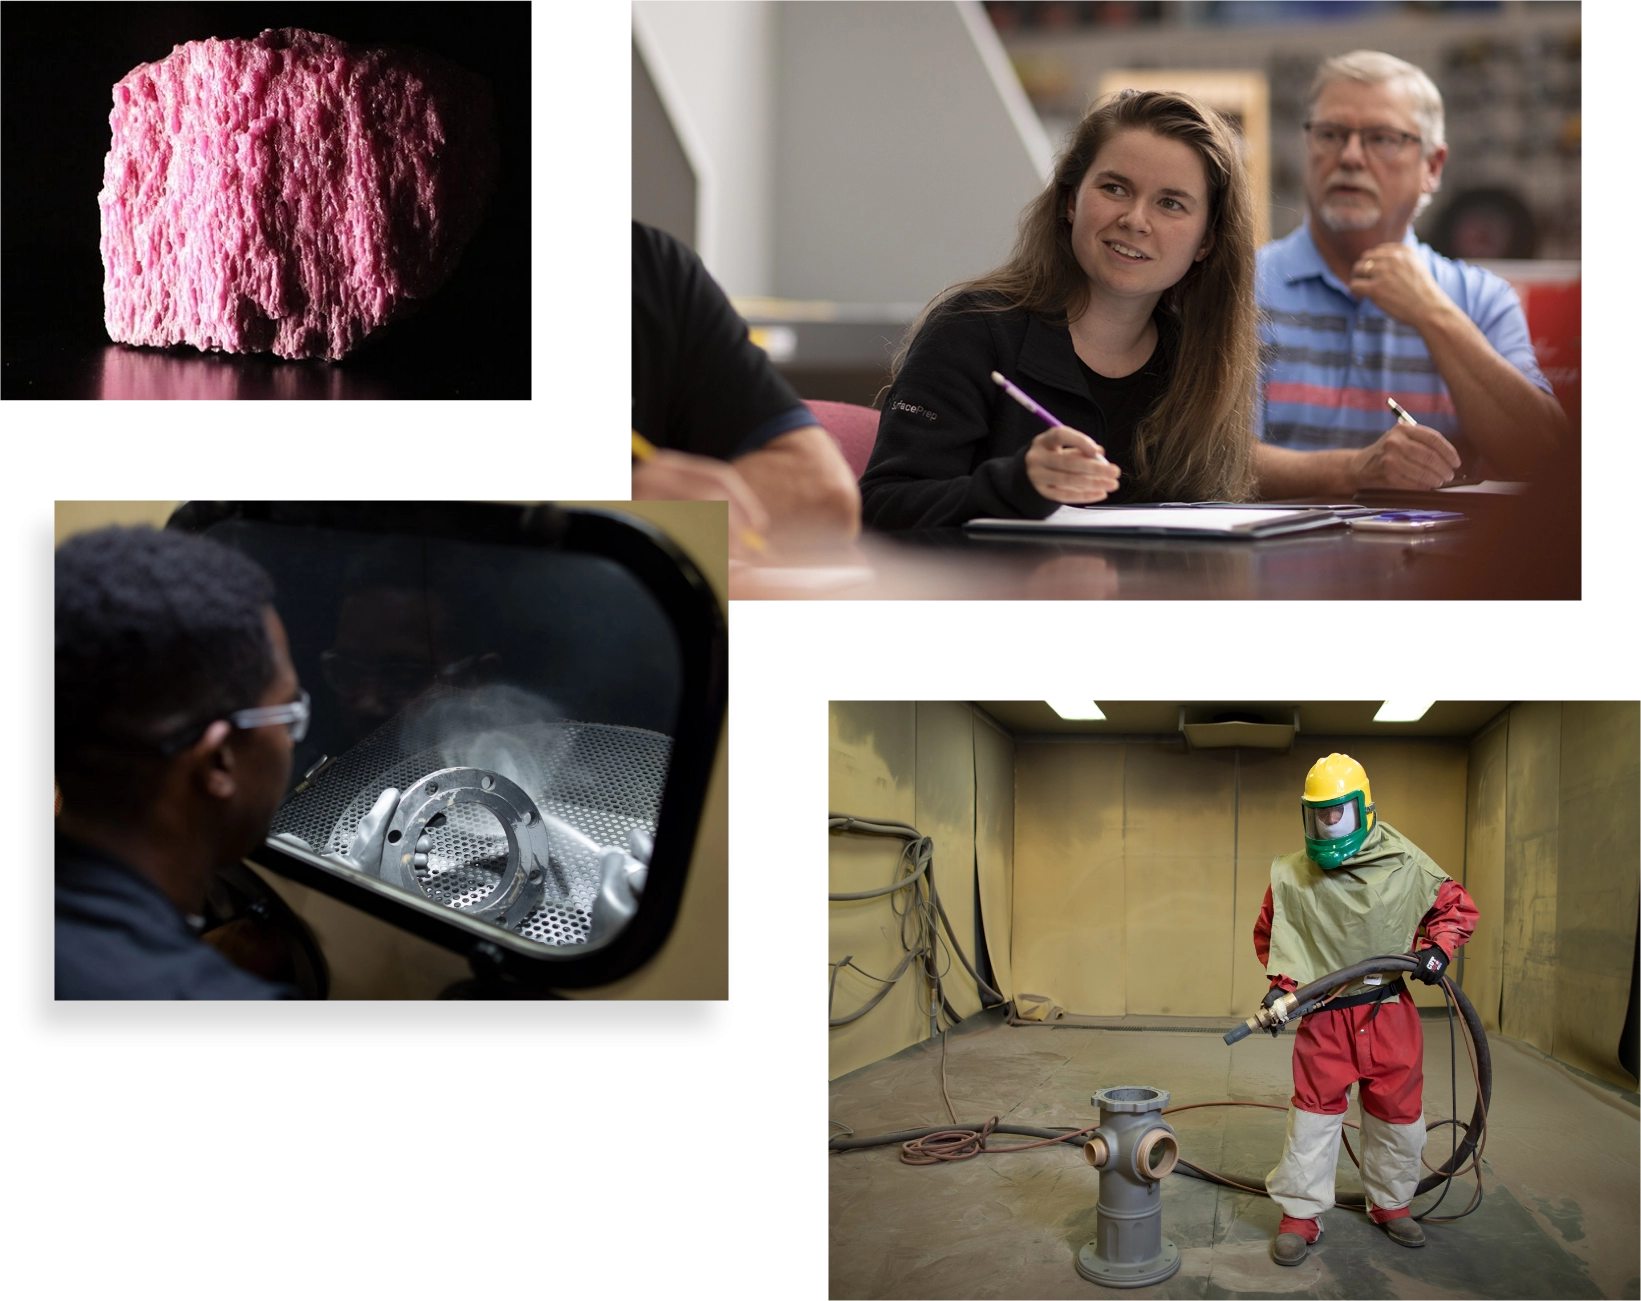 Four SurfacePrep Action Shots (TopLeft) Pink Rock; (TopRight) woman and man writing; (BottomLeft) Man looking throug window at metal with safety gasses; (BottomRight) Man in full safety Suit holding hose aimed at frame of a fire hydrant.